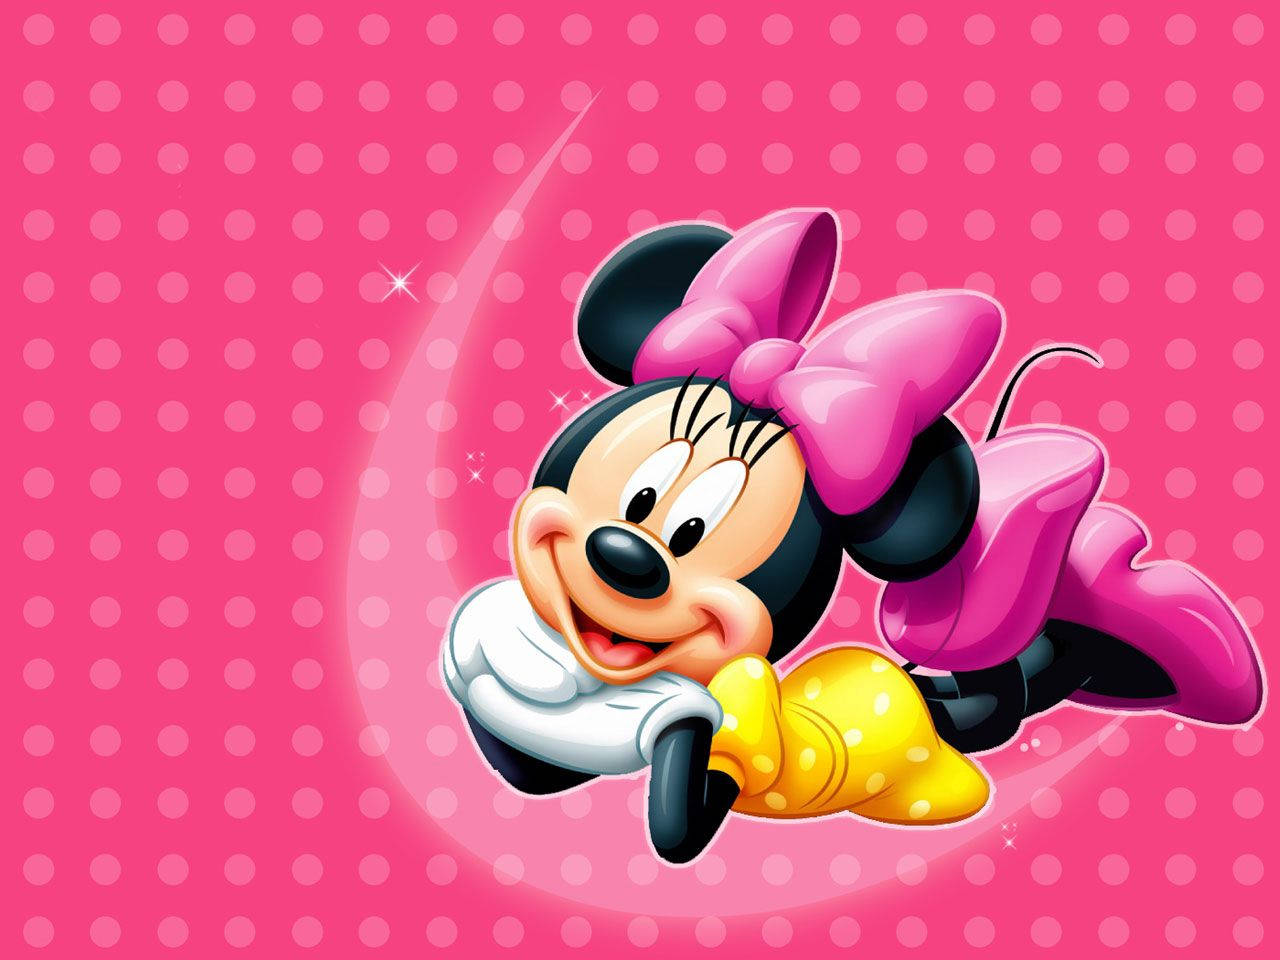 Disney's beloved characters, Mickey and Minnie Mouse spending a day together. Wallpaper